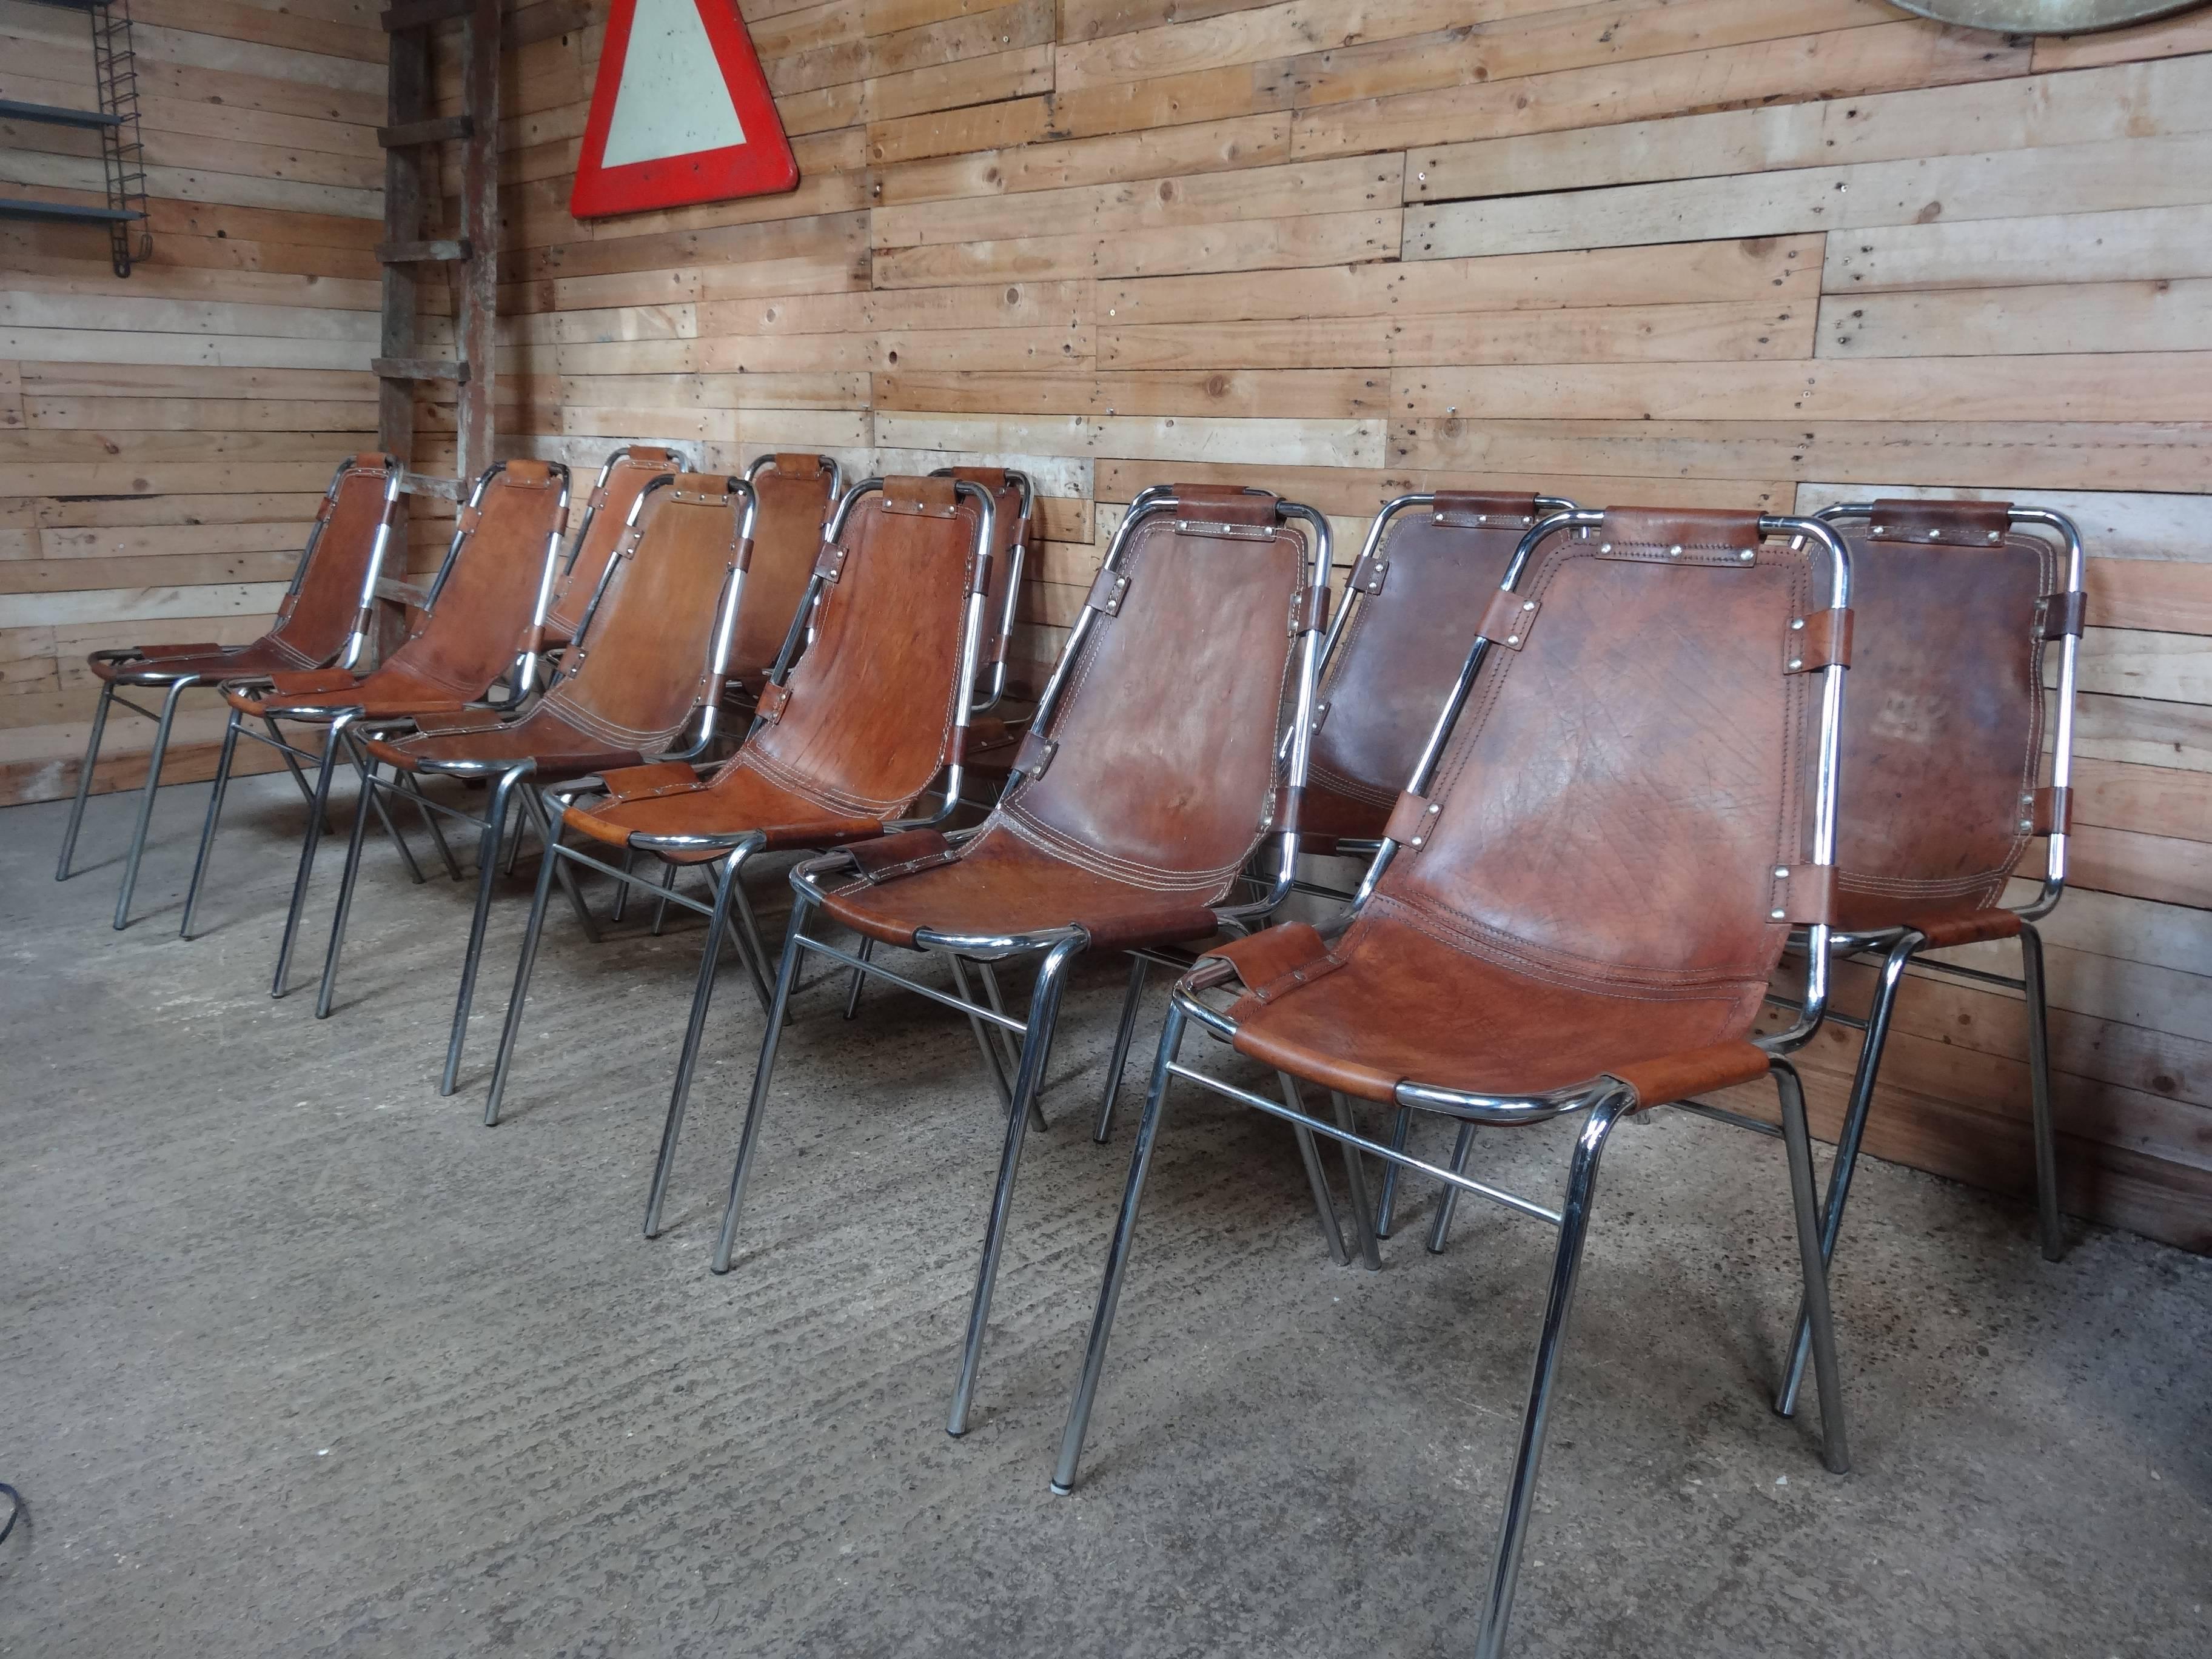 Stunning set of 12 chairs, difficult to find a set of chairs like this on any web site worldwide! designed / chosen by Charlotte Perriand for and used in the Ski Resort Les Arcs, circa 1960. 

These chairs have been chosen by us on their lovely